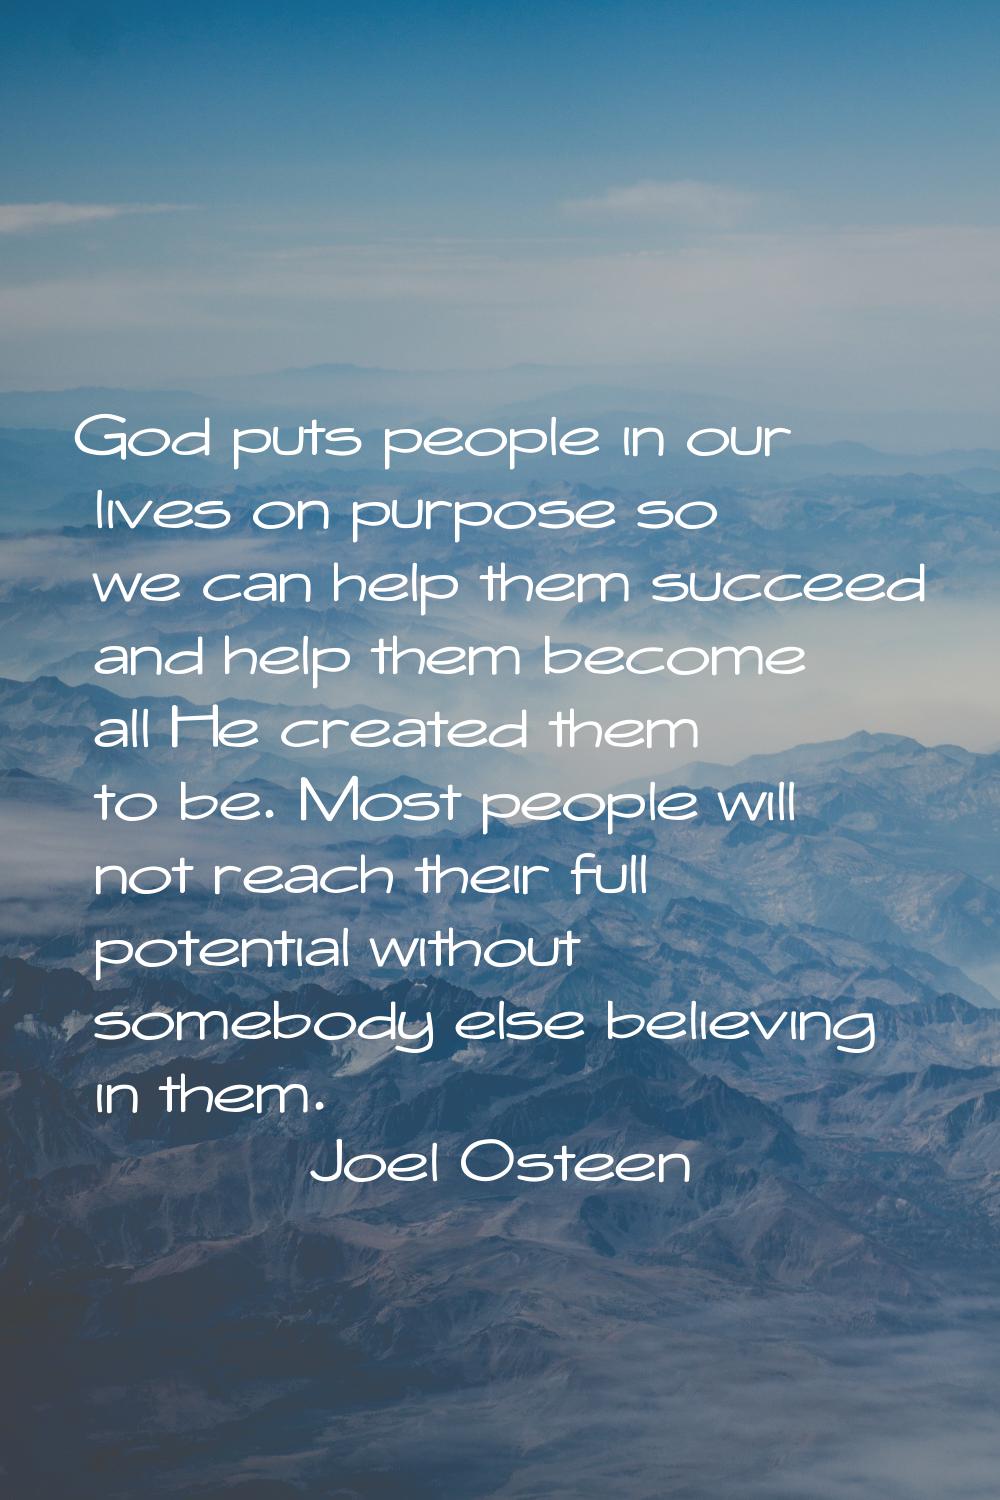 God puts people in our lives on purpose so we can help them succeed and help them become all He cre